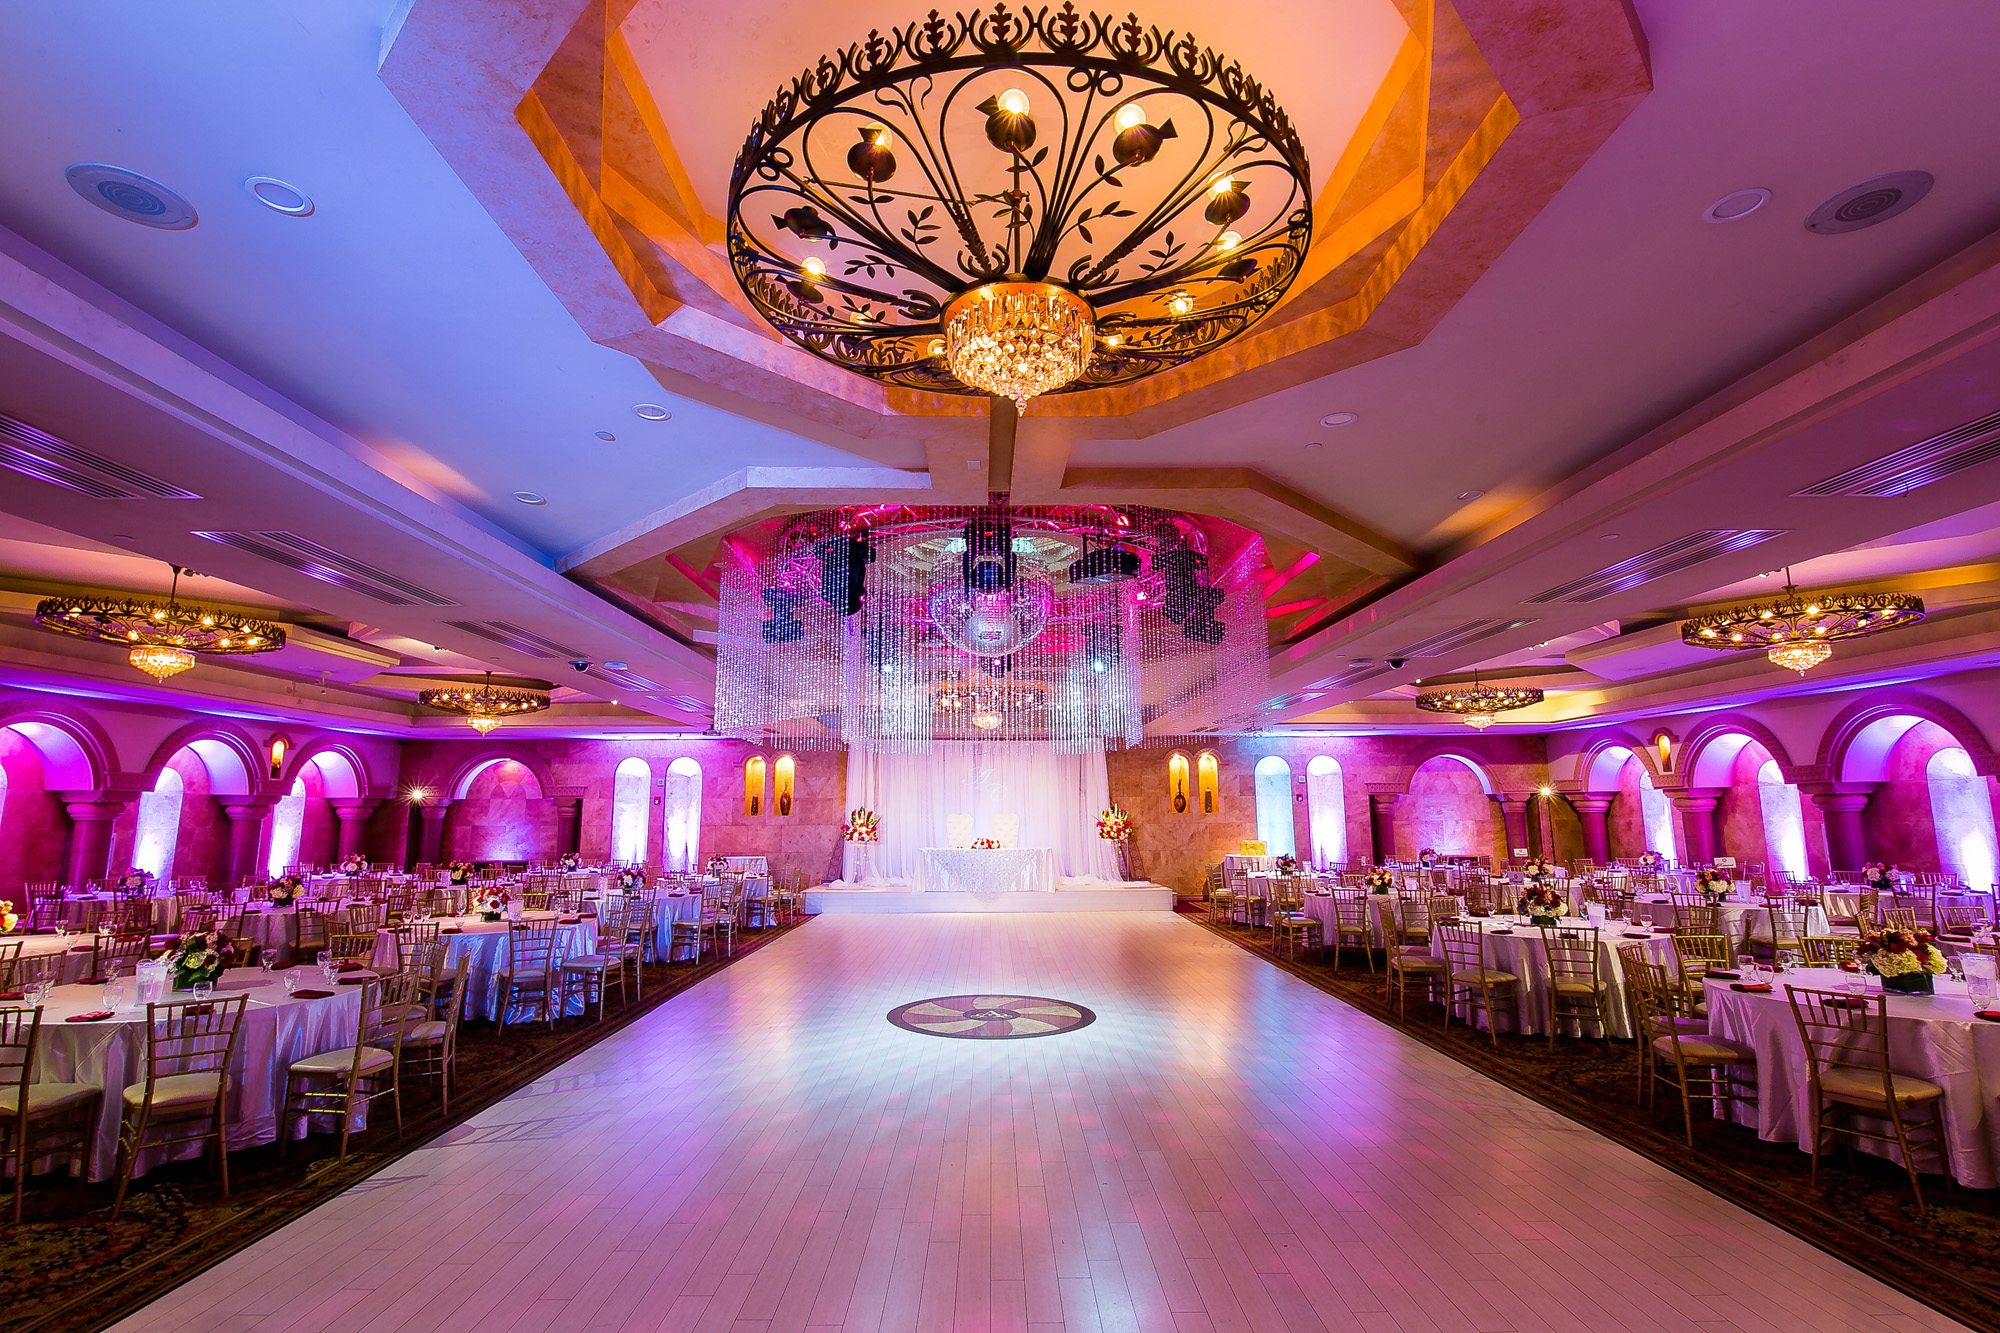 Le Foyer Banquet Hall